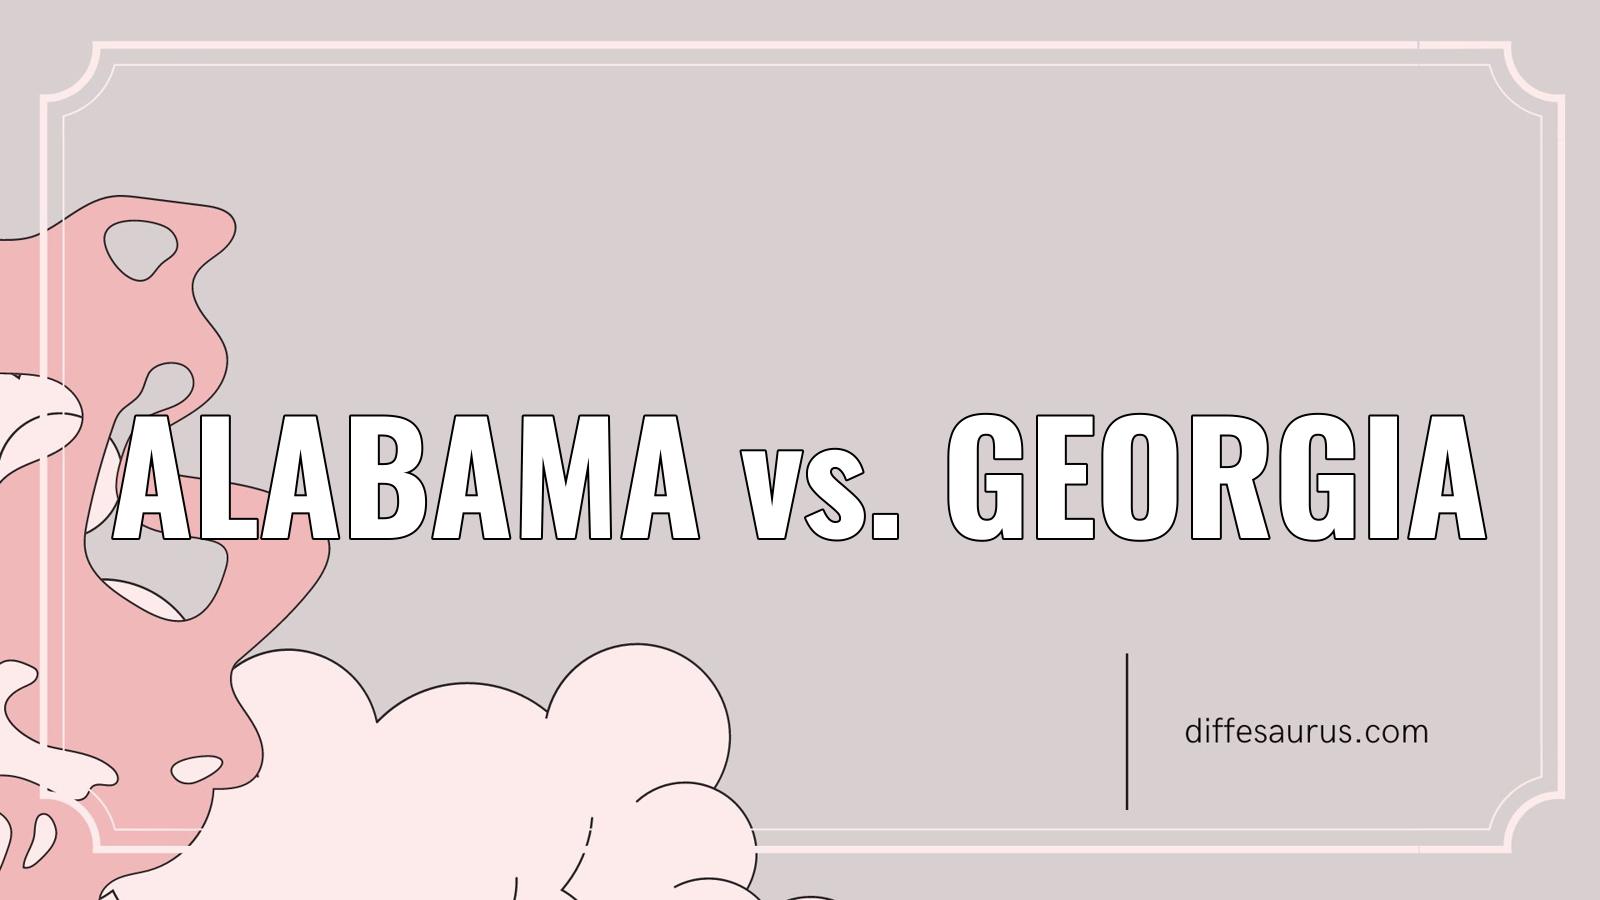 You are currently viewing Alabama vs. Georgia: What’s the Difference?